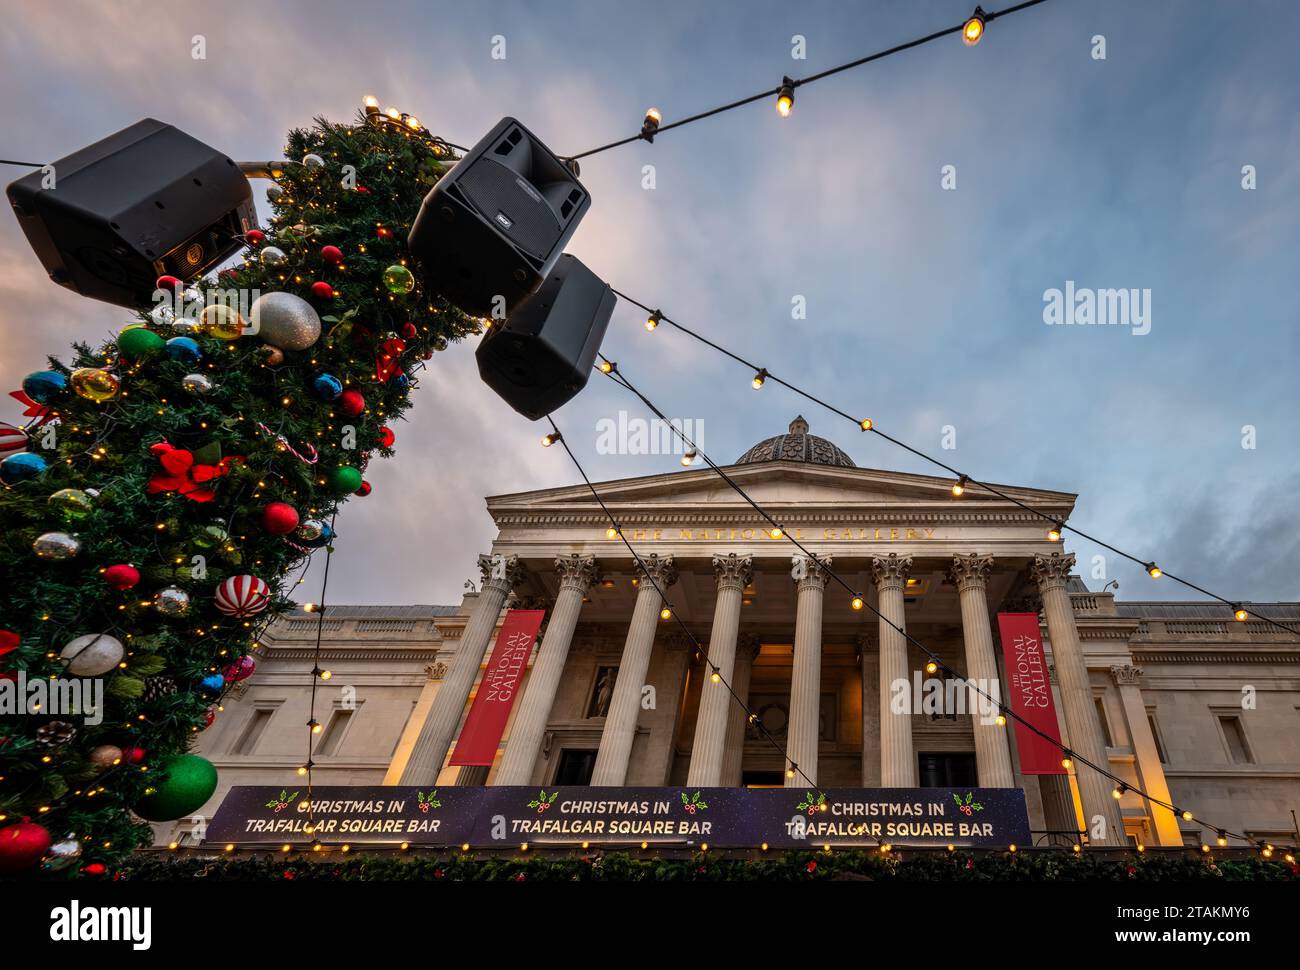 London, UK - Nov 20 2023: The National Gallery in Trafalgar Square, London. Decorations at the Trafalgar Square Christmas Market in the foreground. Stock Photo